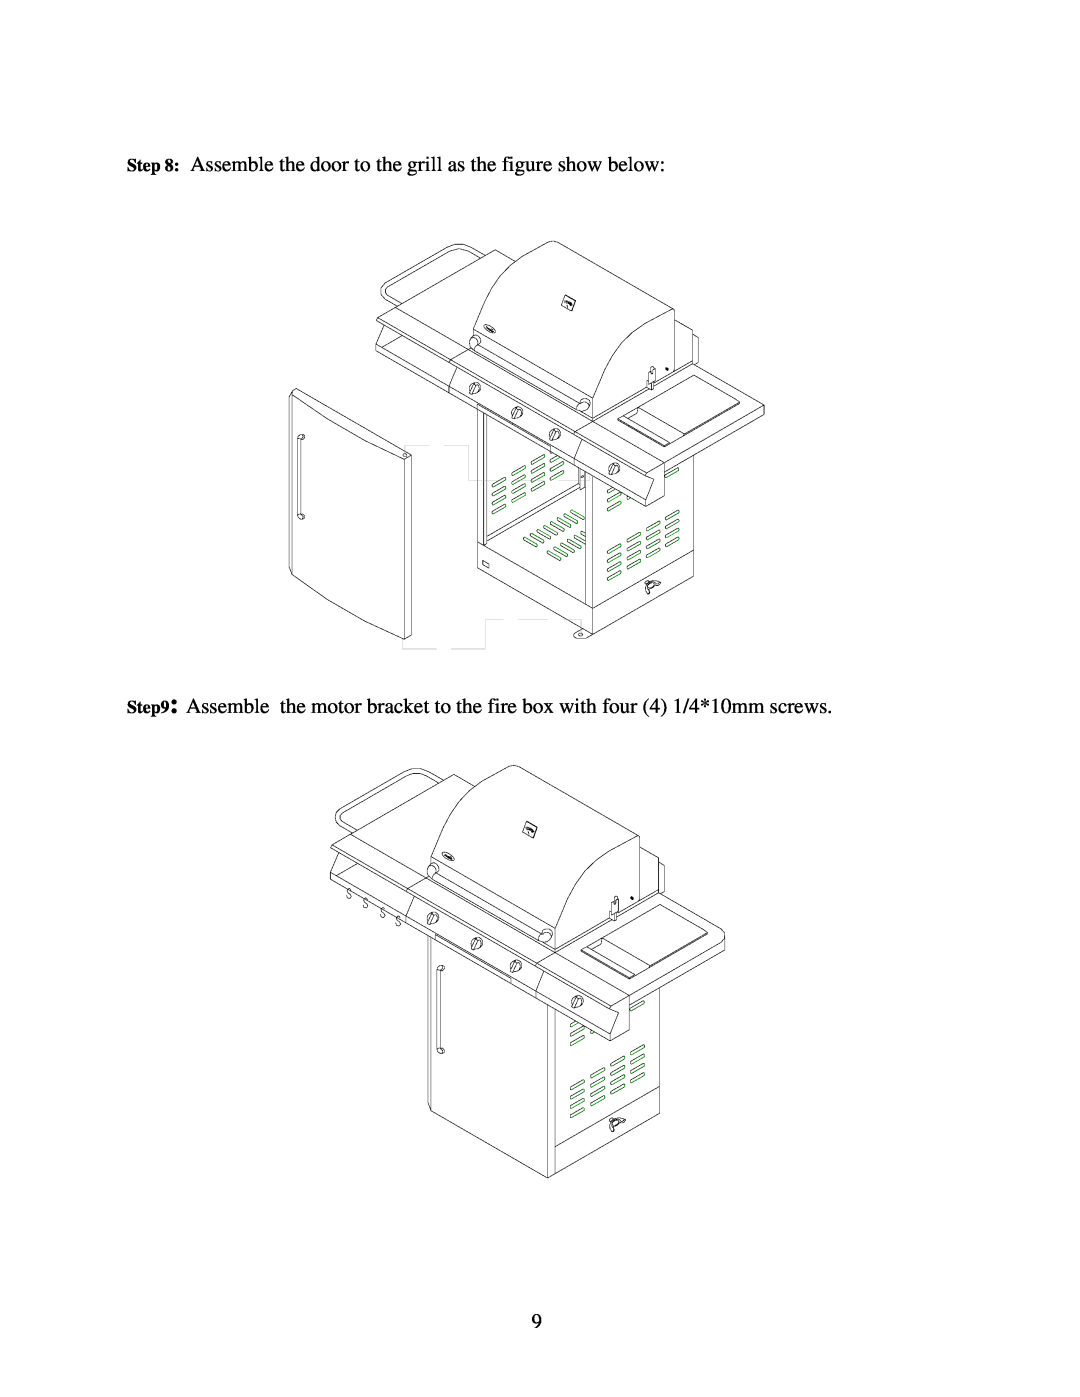 Nexgrill 720-0125-LP manual Assemble the door to the grill as the figure show below, TheG T lassoM 